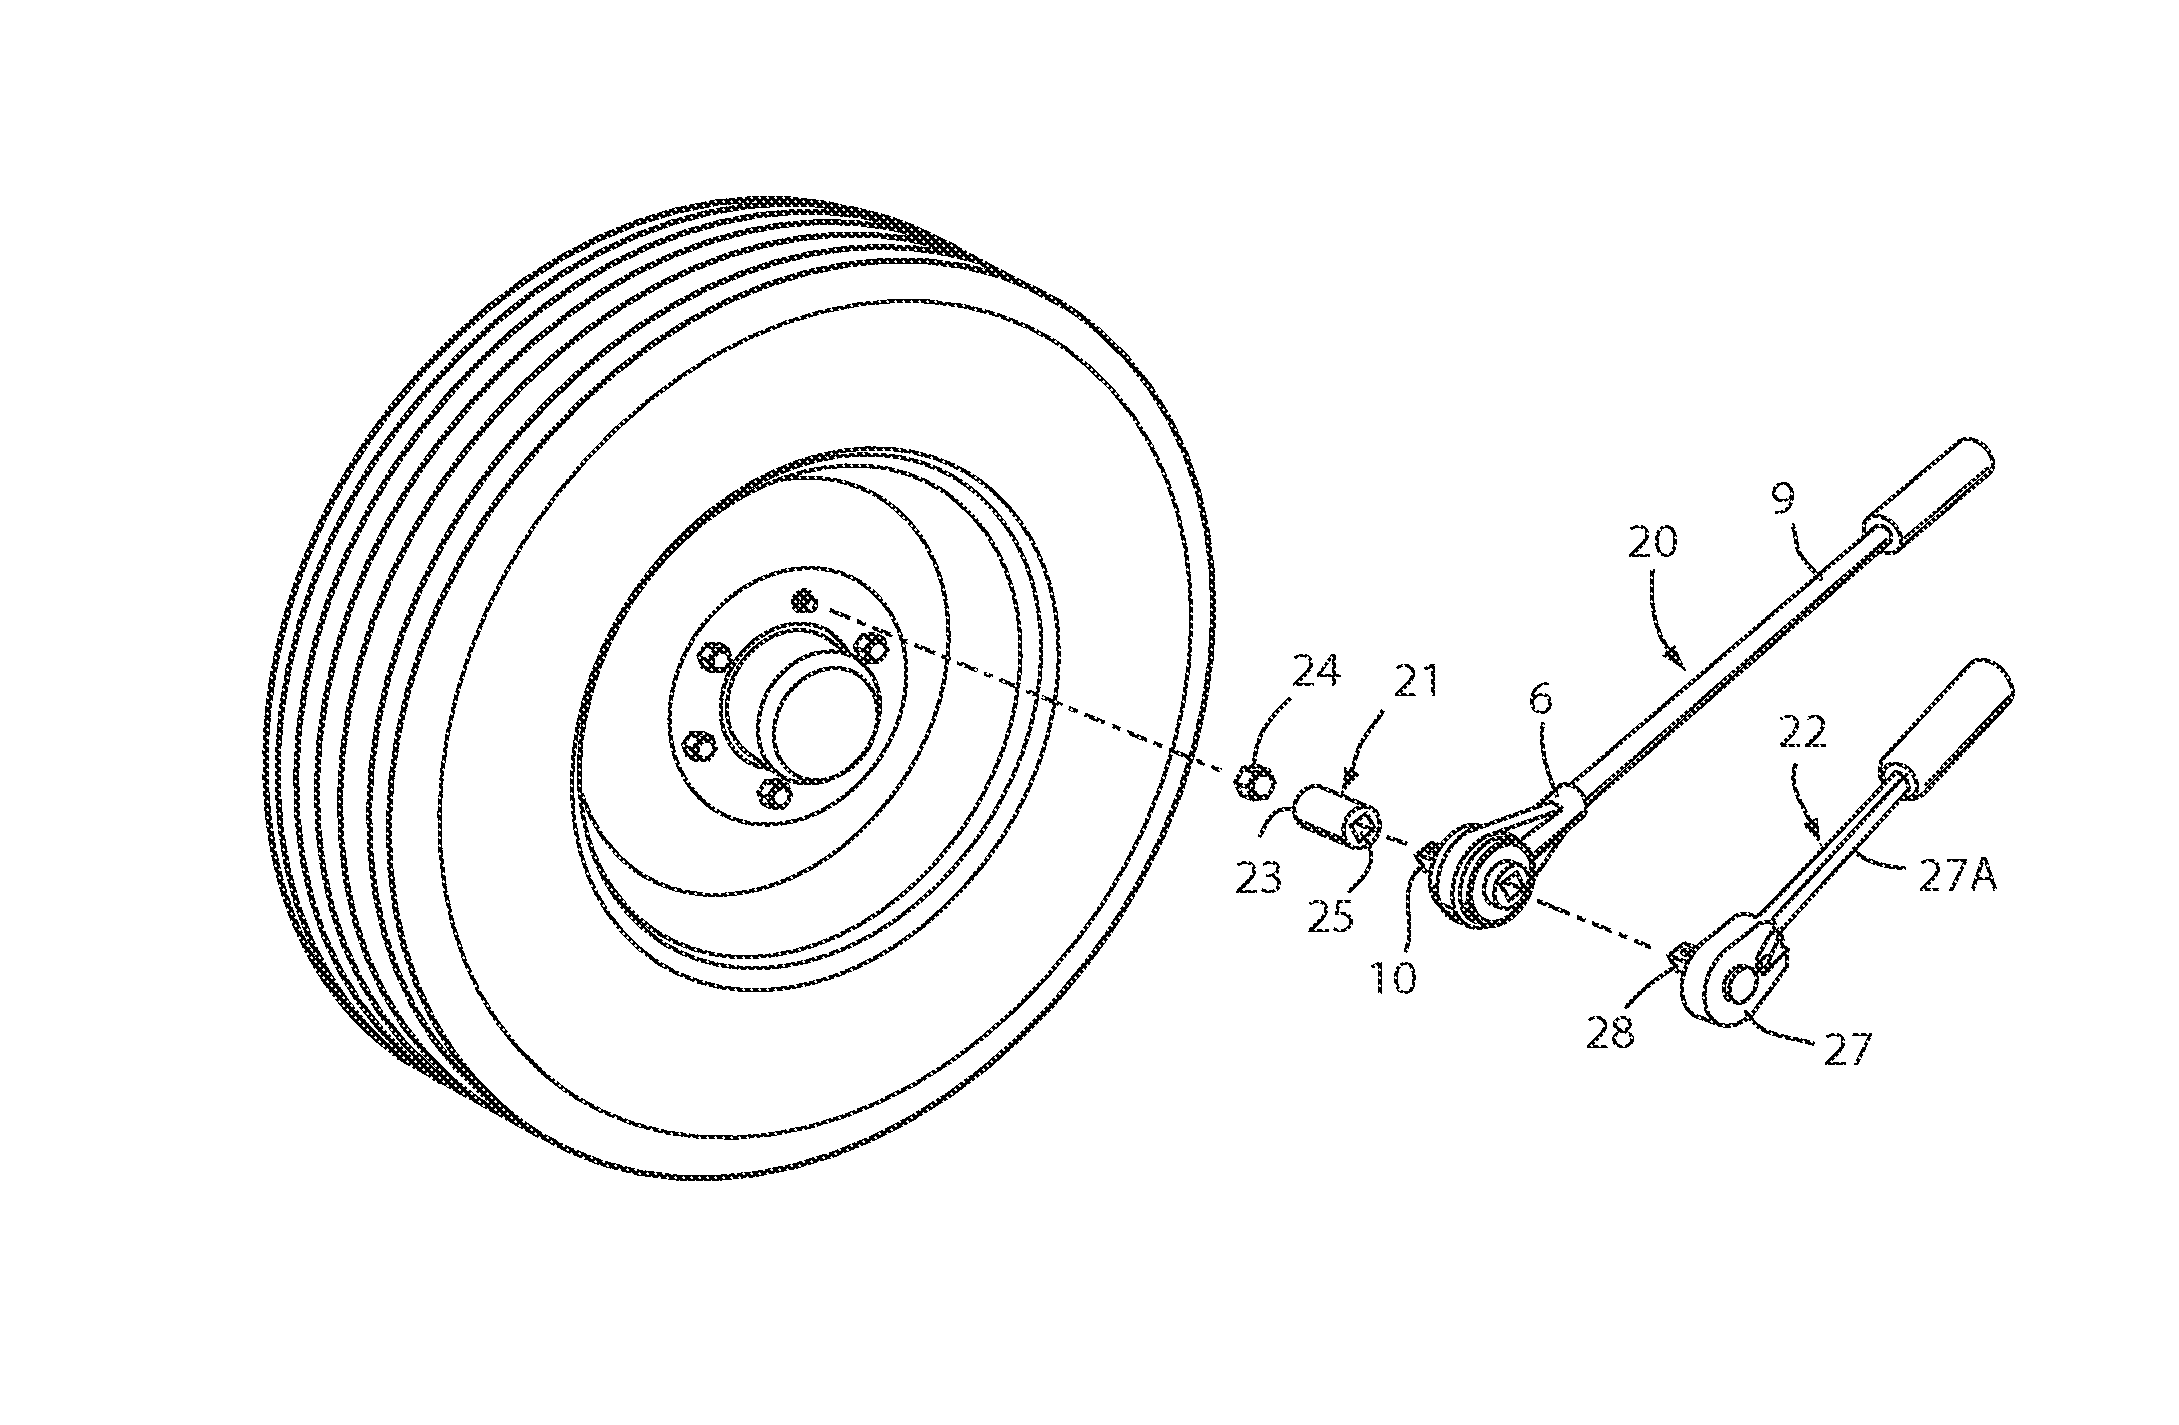 Torque multiplier and method of use